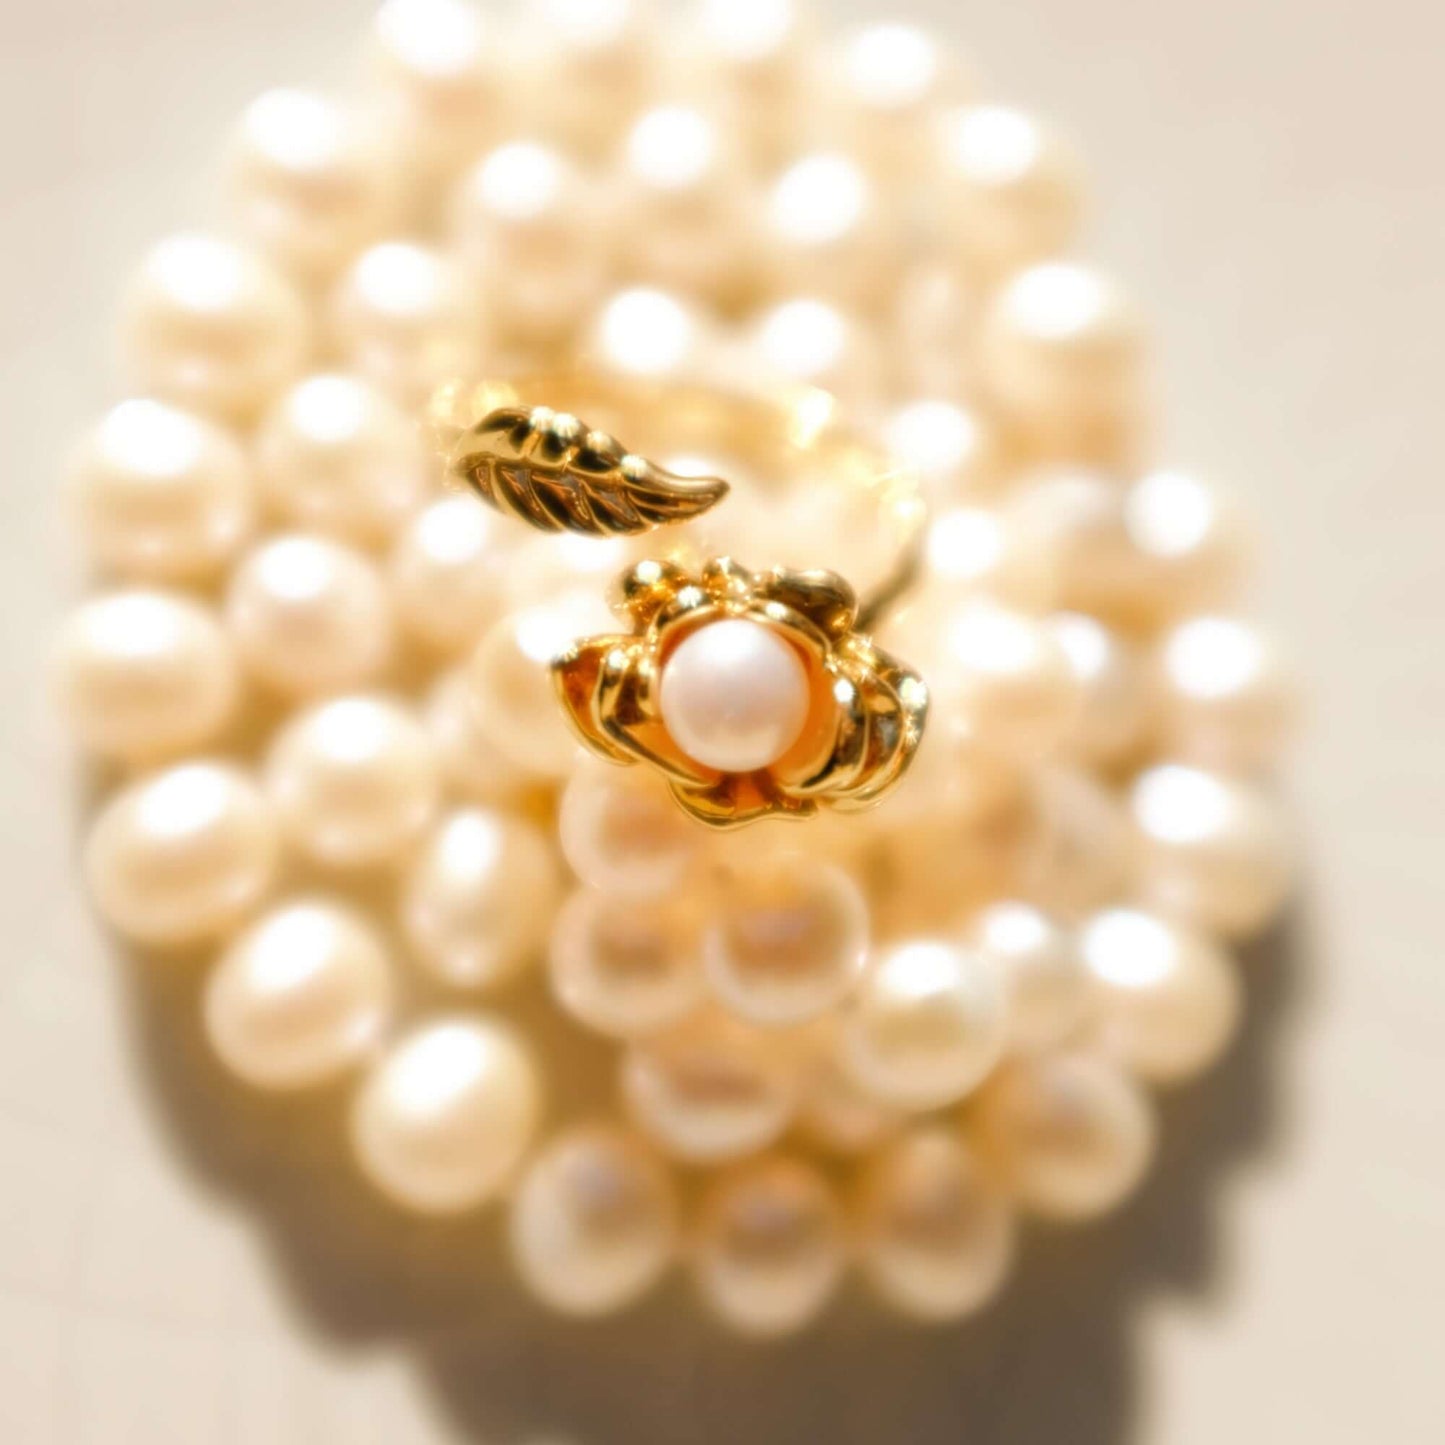 The Little Prince Rose Flower Pearl Open Ring: Floral Leaf Design, Pearl Ring, Pearl Flower Ring,  Leaf Ring, Unique Gift for Her,